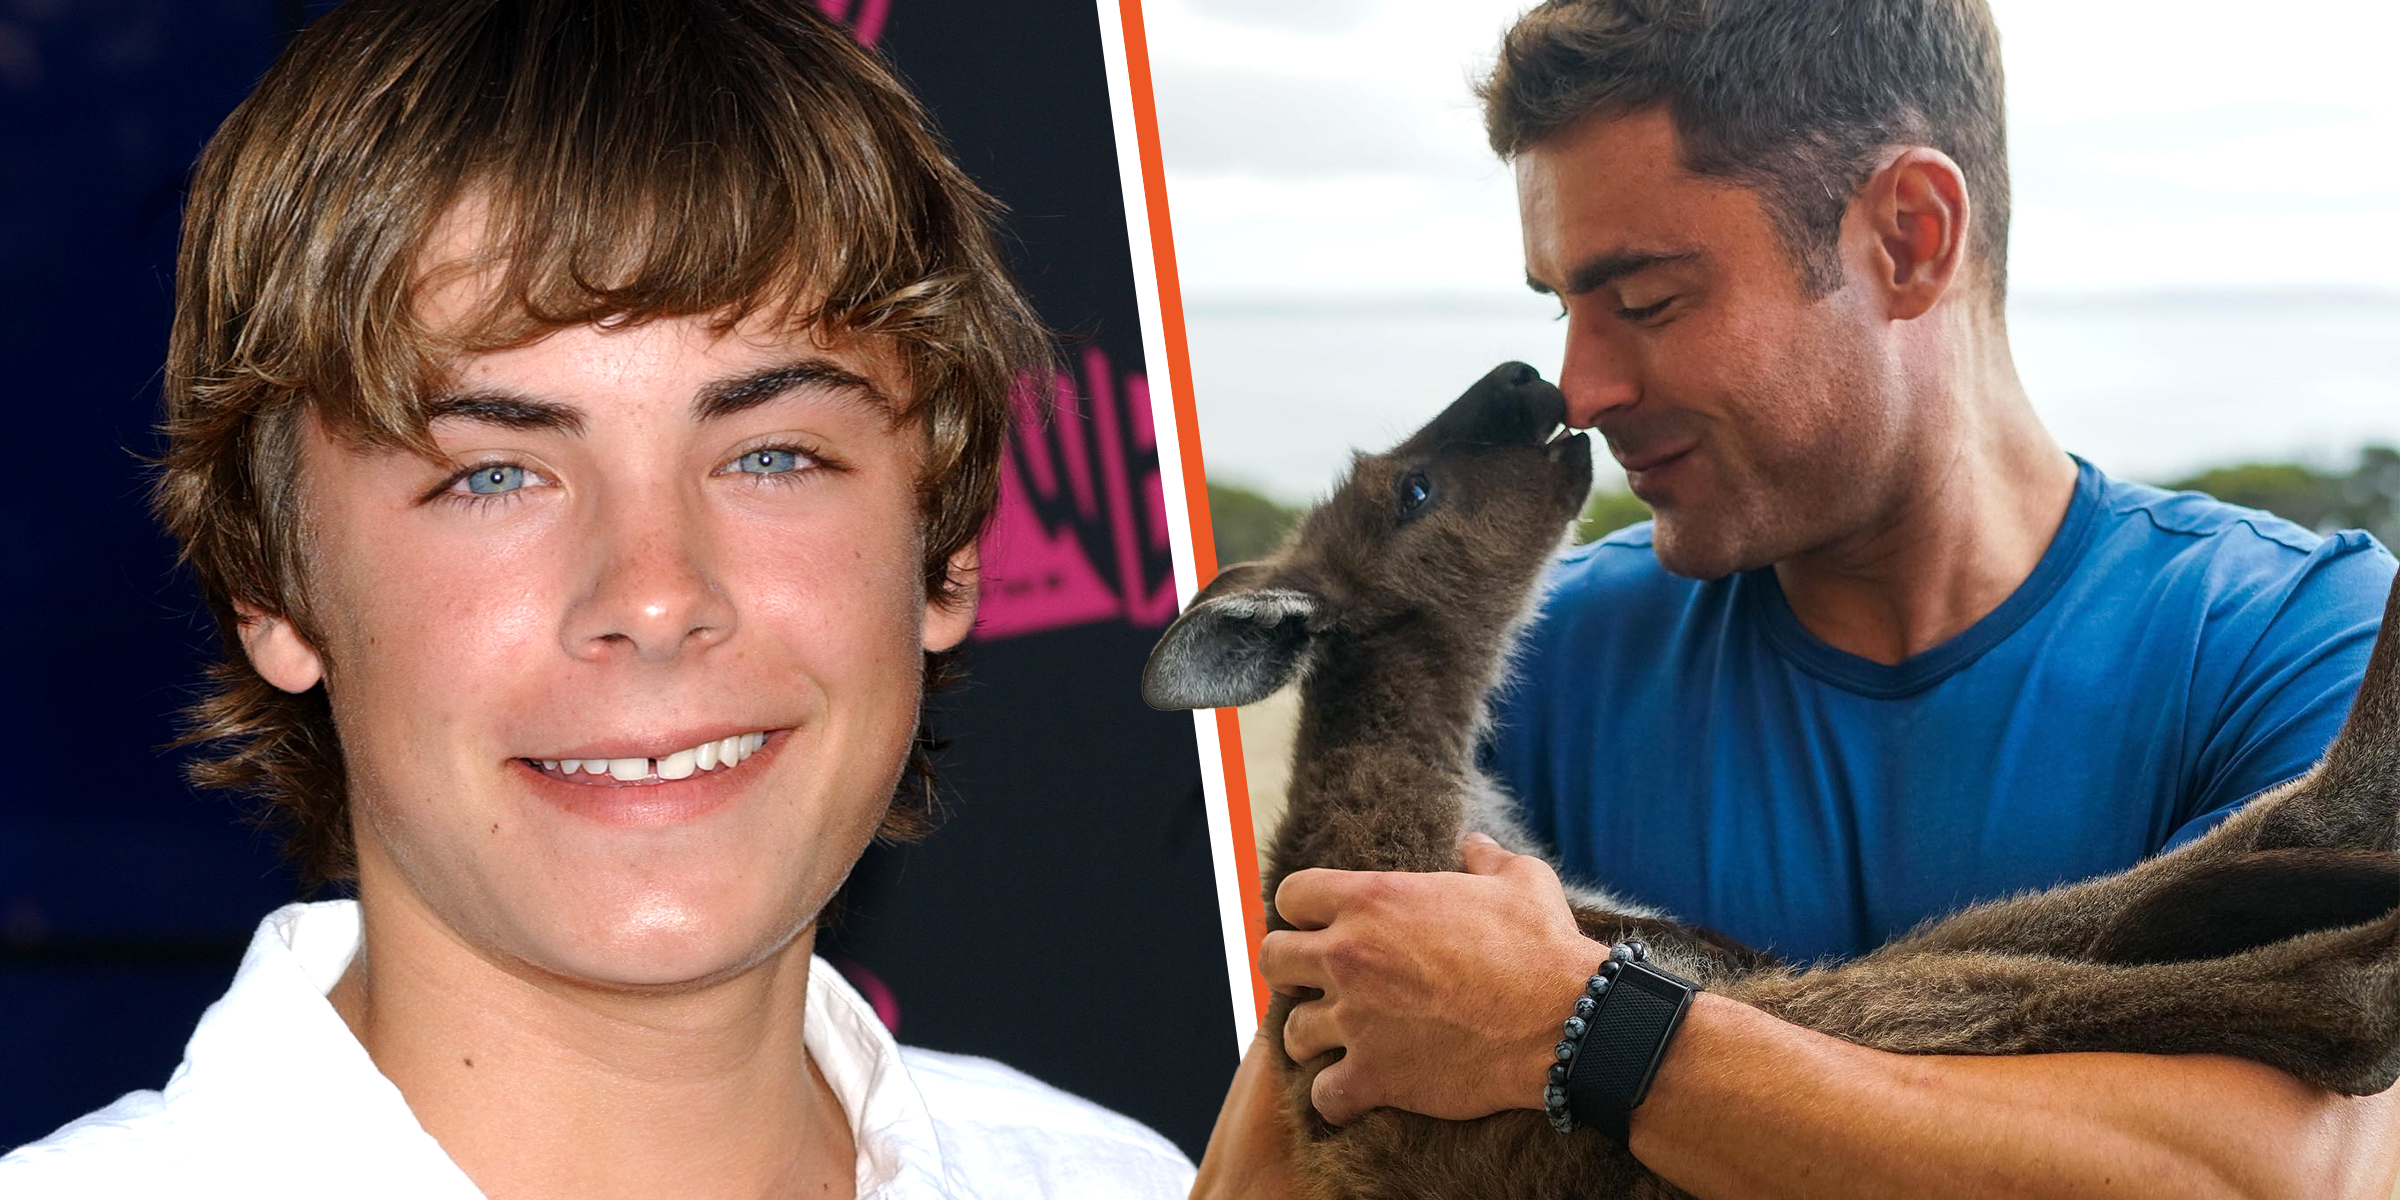 Zac Efron then and now | Sources: Getty Images | instagram.com/zacefron